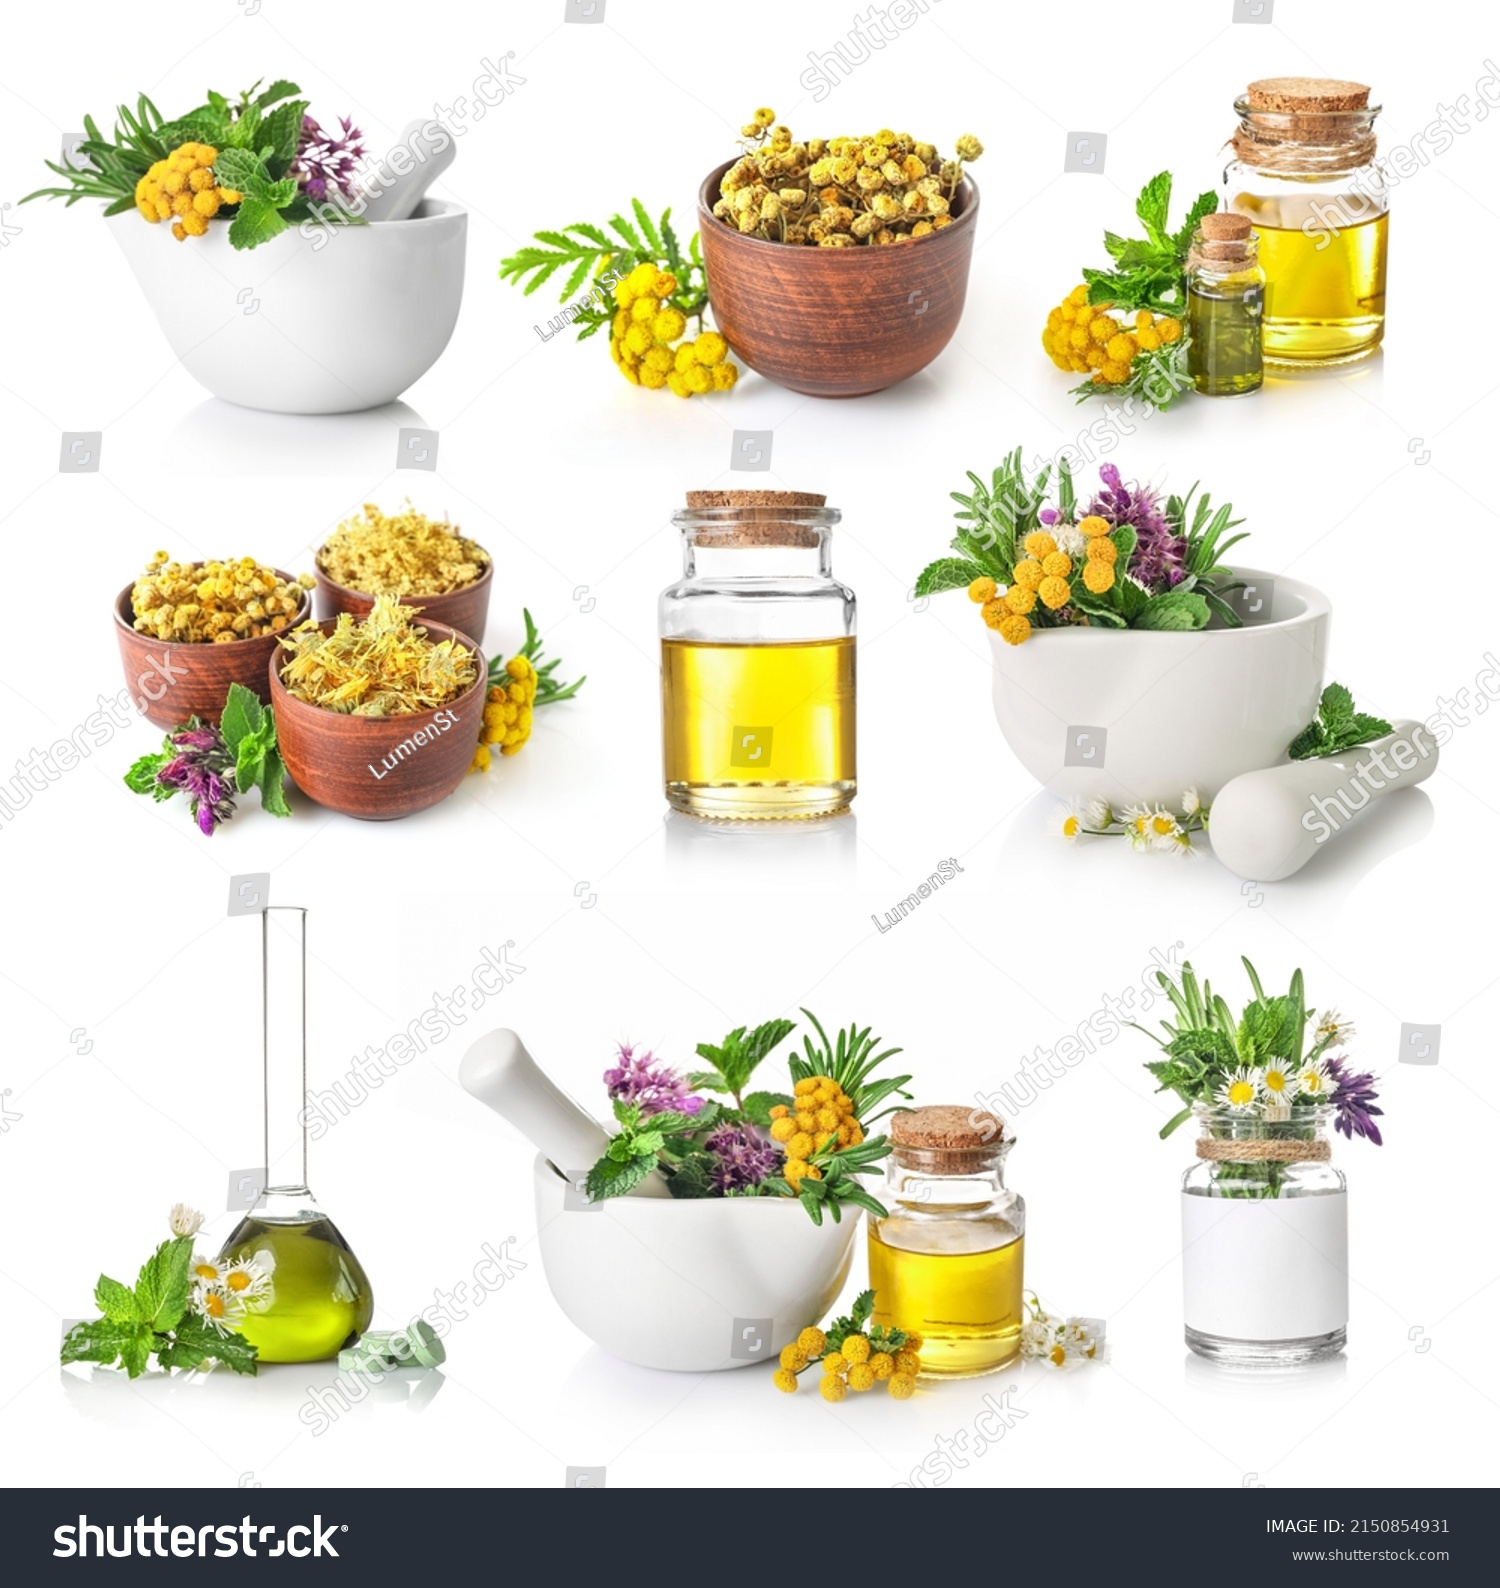 Set of nedicinal herbs in mortar and bottles isolated on white background. Herbal medicine concept. #2150854931